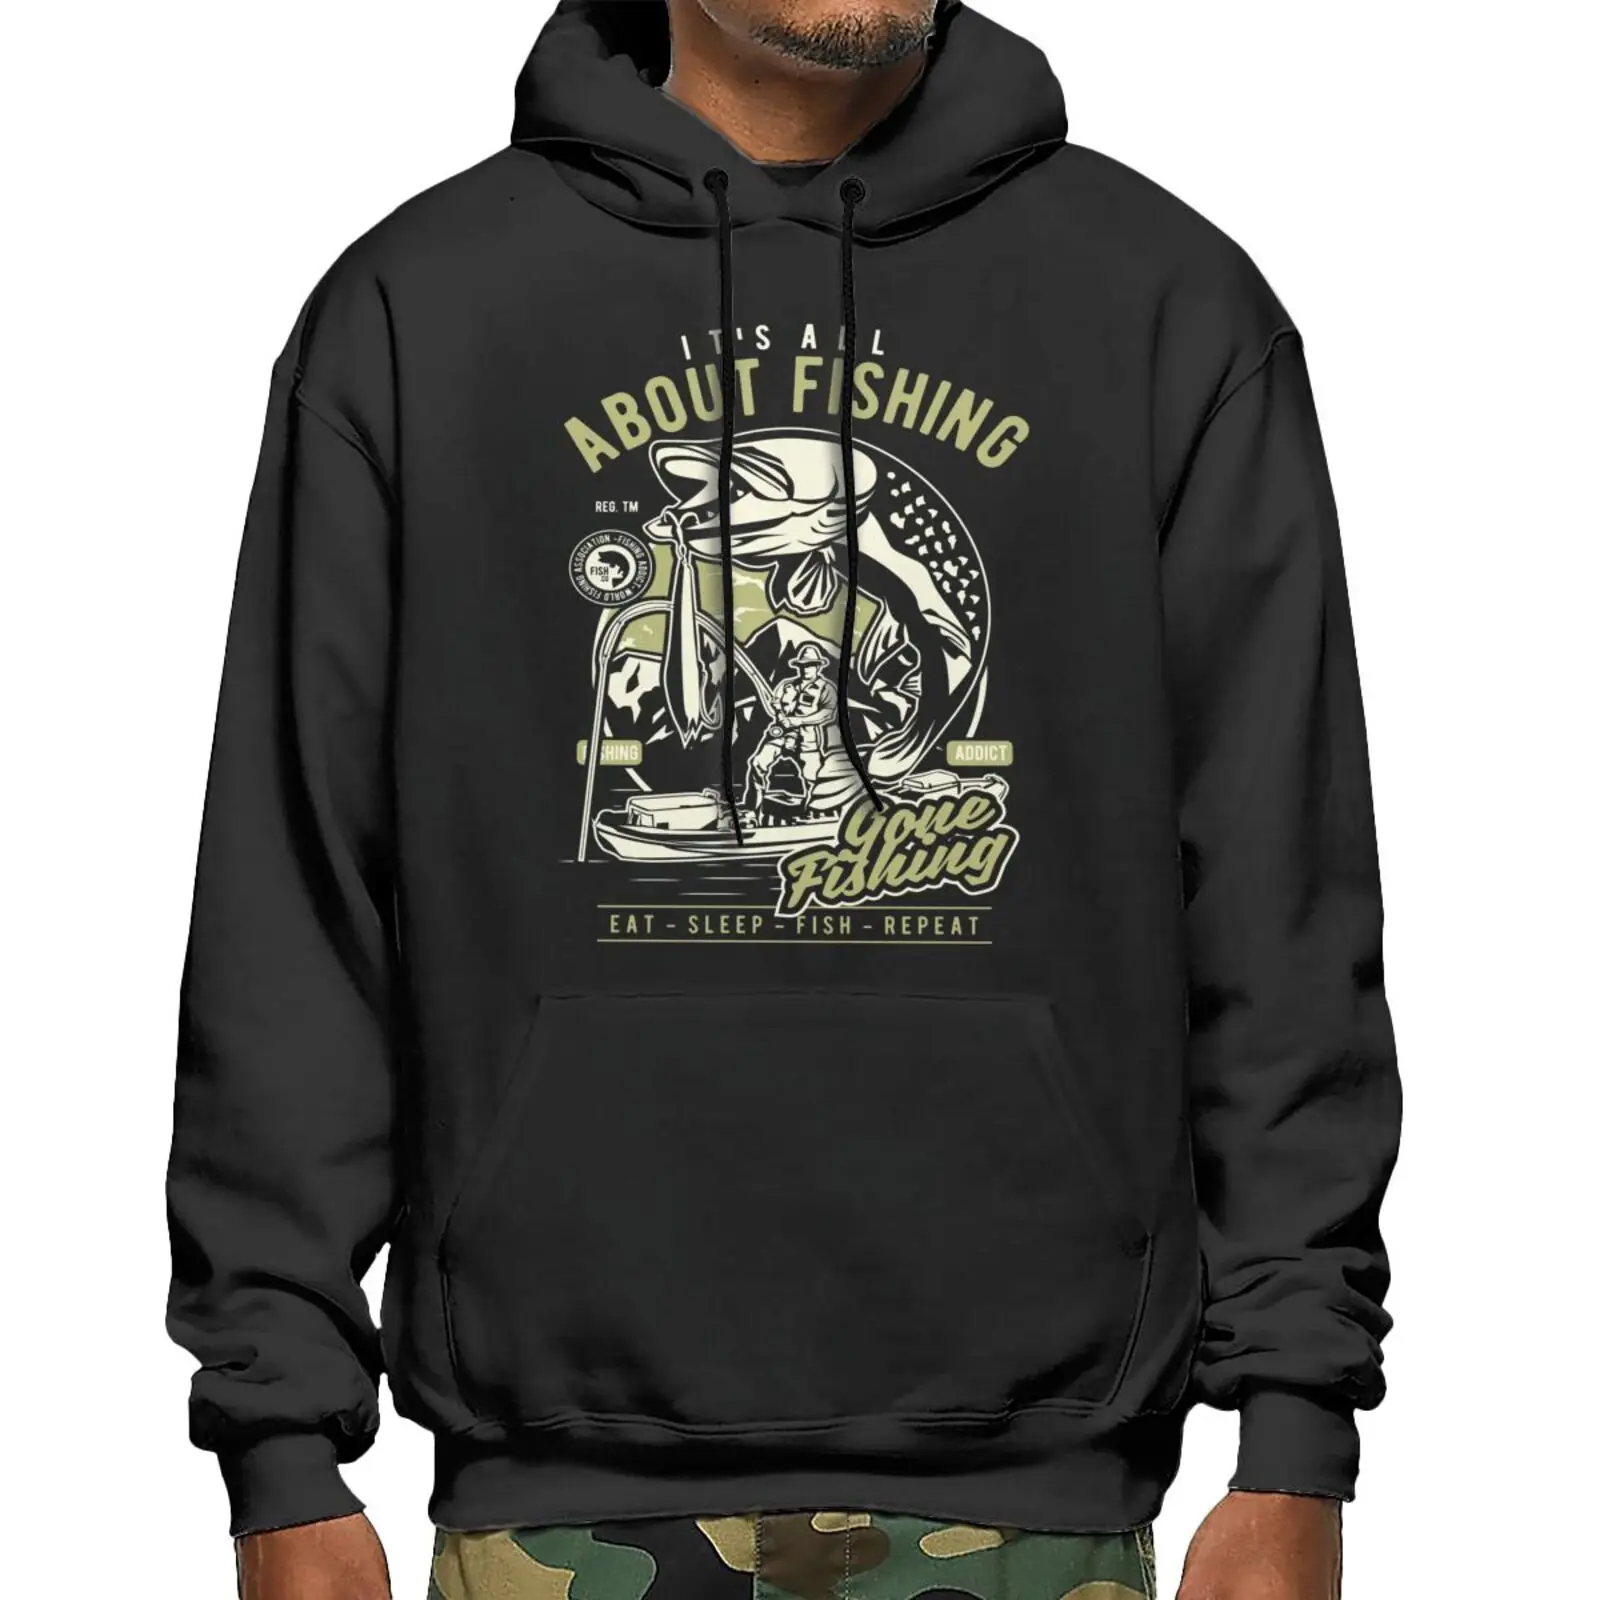 

Its All About Fishing Eat Sleep Sweatshirts Hoodies Hood Female Sweatshirt Zipper Hoodie Clothes For Teenagers Clothes For Men